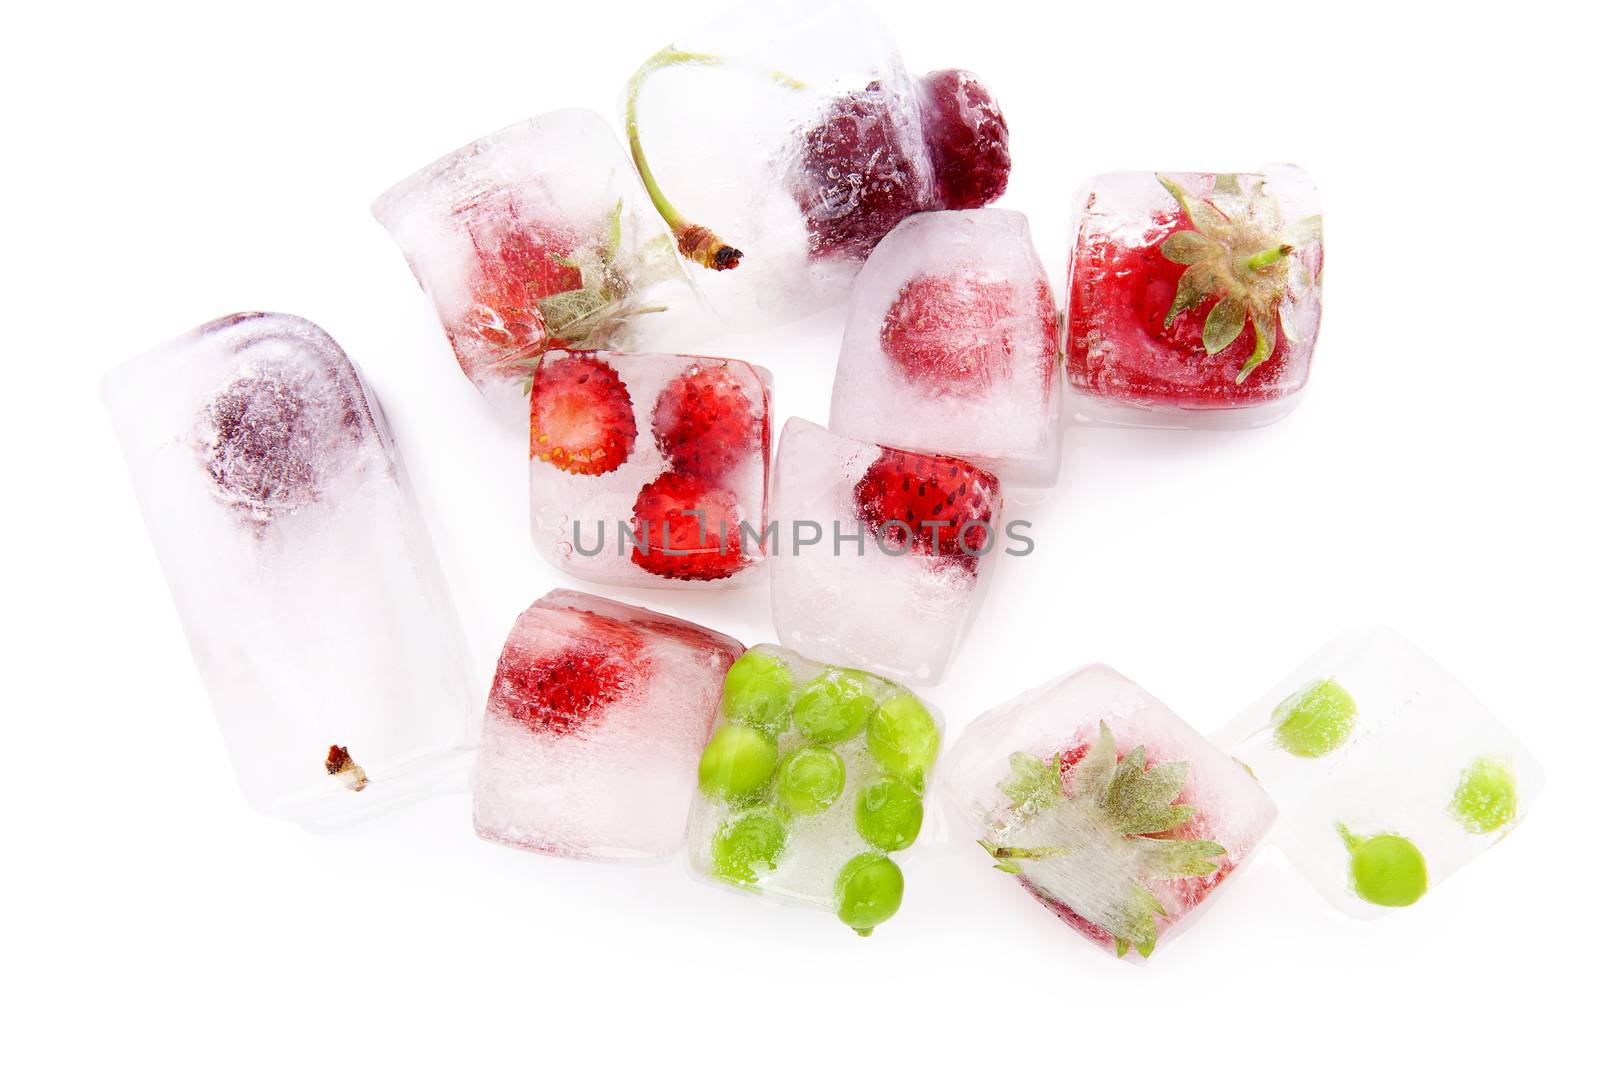 Fresh delicious summer fruit and vegetable frozen in ice cubes isolated on white, top view. Strawberries, cherries and green peas.